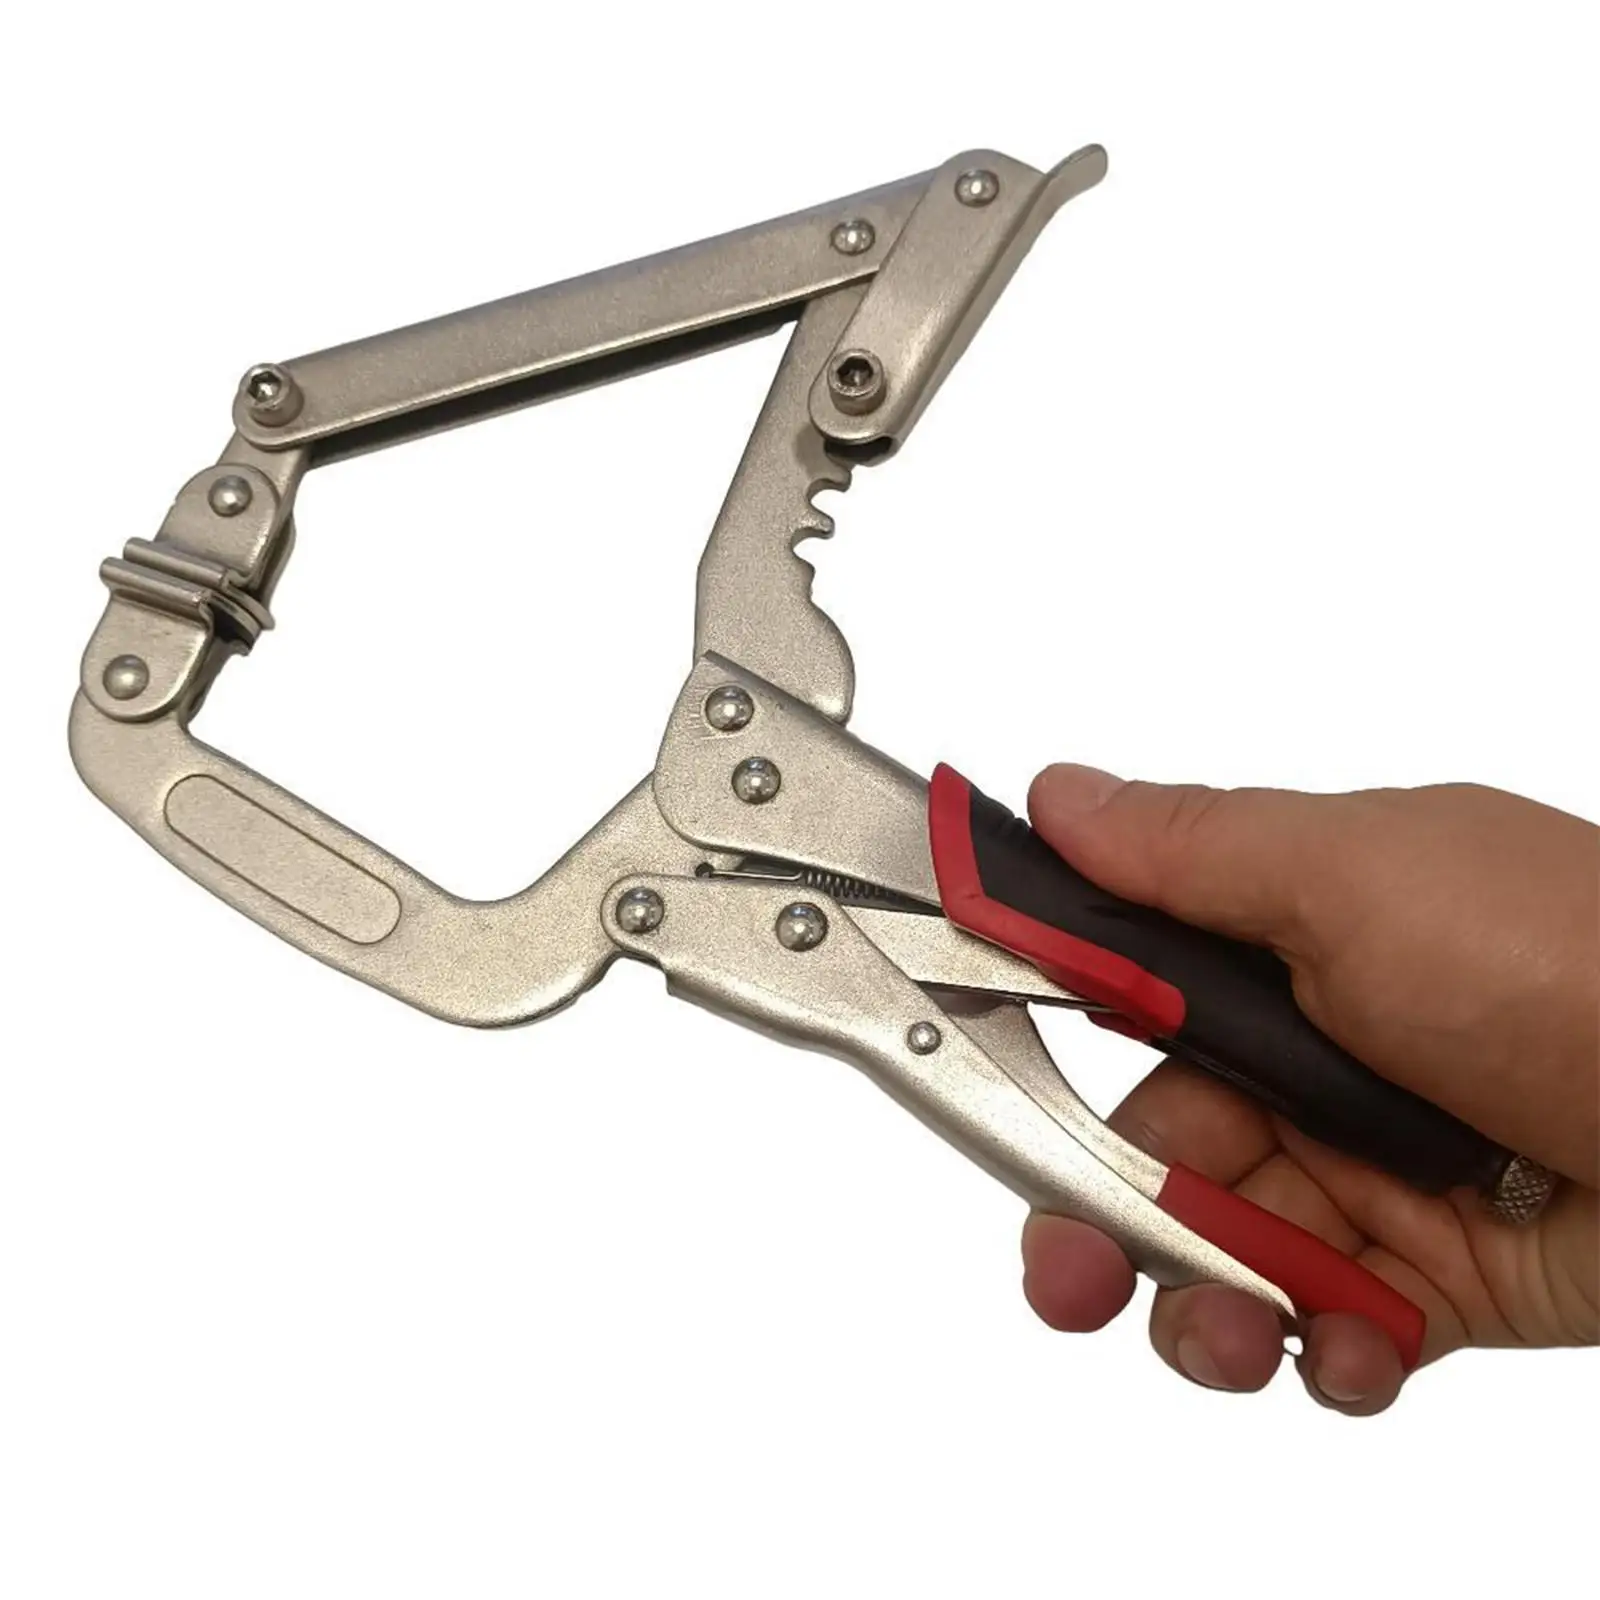 Locking C Clamp Pliers Nonslip Handles Face Clamp Locking Pliers 10 inch for Welding Home DIY Woodworking Pocket Hole Joinery